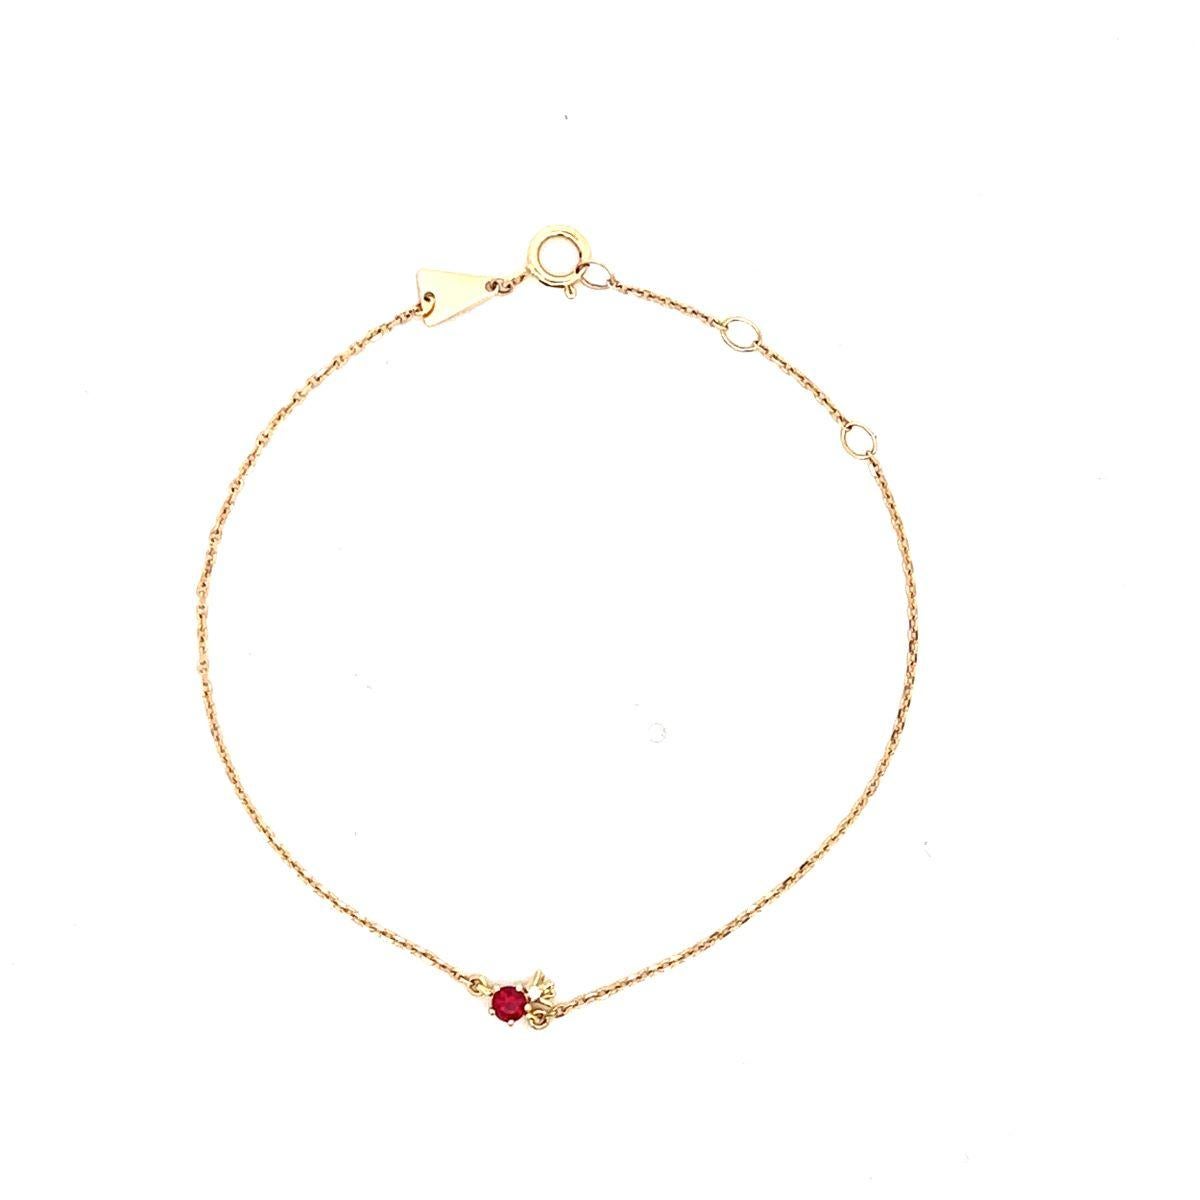 Adina Reyter One of a Kind Ruby + Diamond Pomegranate Bracelet - Y14

This is a 14K yellow gold chain bracelet with a Ruby and Diamond pomegranate. 

Measurements: Pomegranate measures 5 mm x 3 mm. Adjustable lengths 6